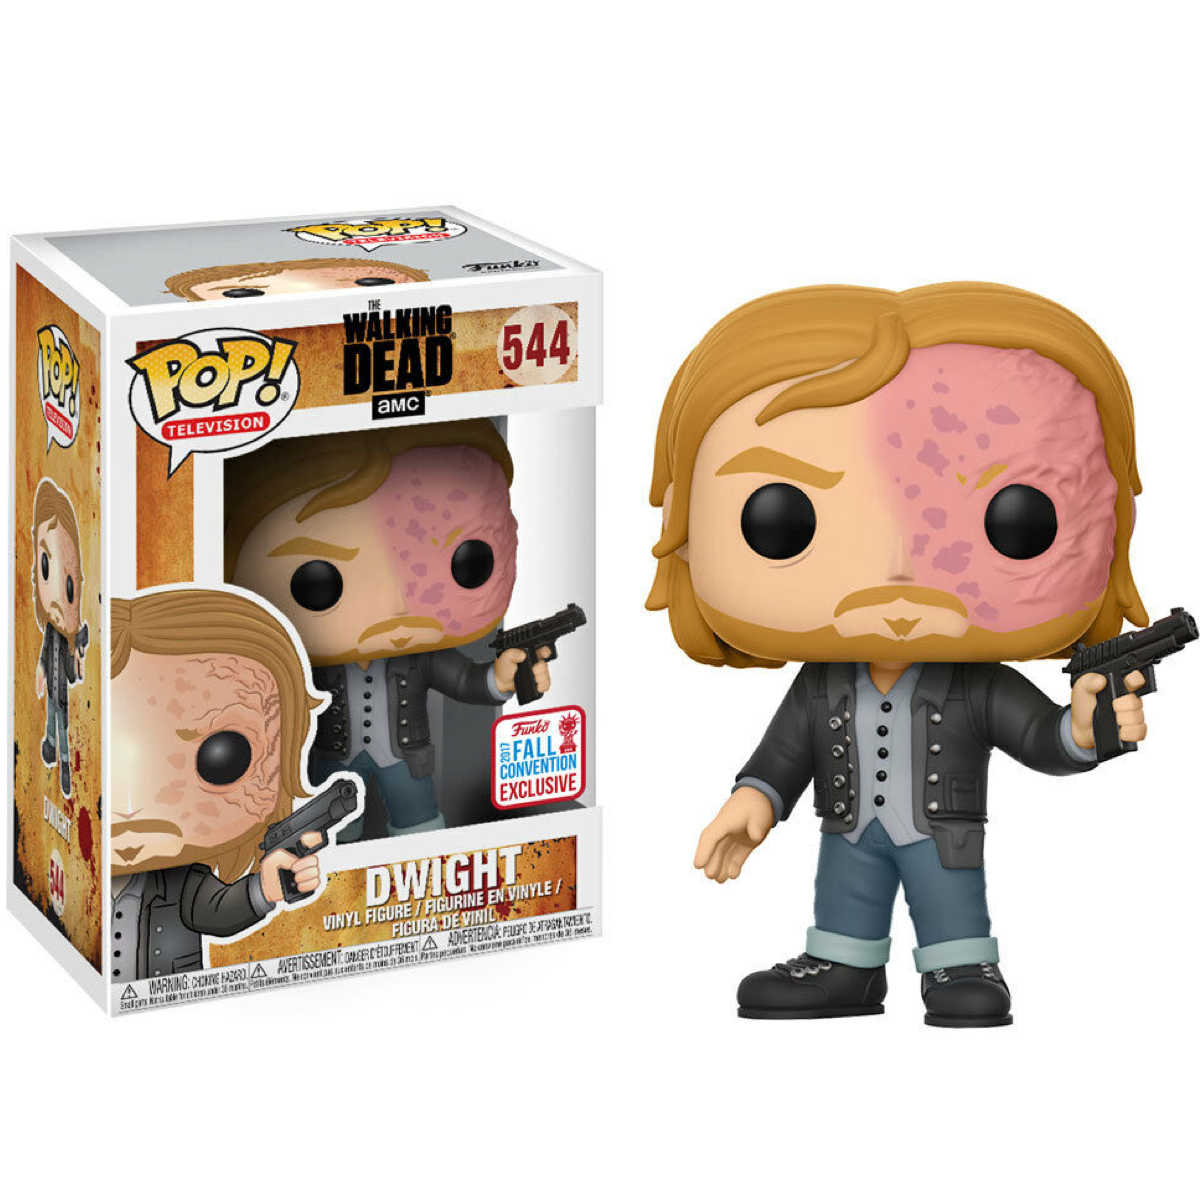  DWIGHT BURNED NYCC 2017 CONVENTION EXCLUSIVE FUNKO POP WALKING DEAD TWD AMC #544</p><BR>In Stock<BR>In Stock Safety Information<br>Warning: Not suitable for children under 3 years. Small Parts. 